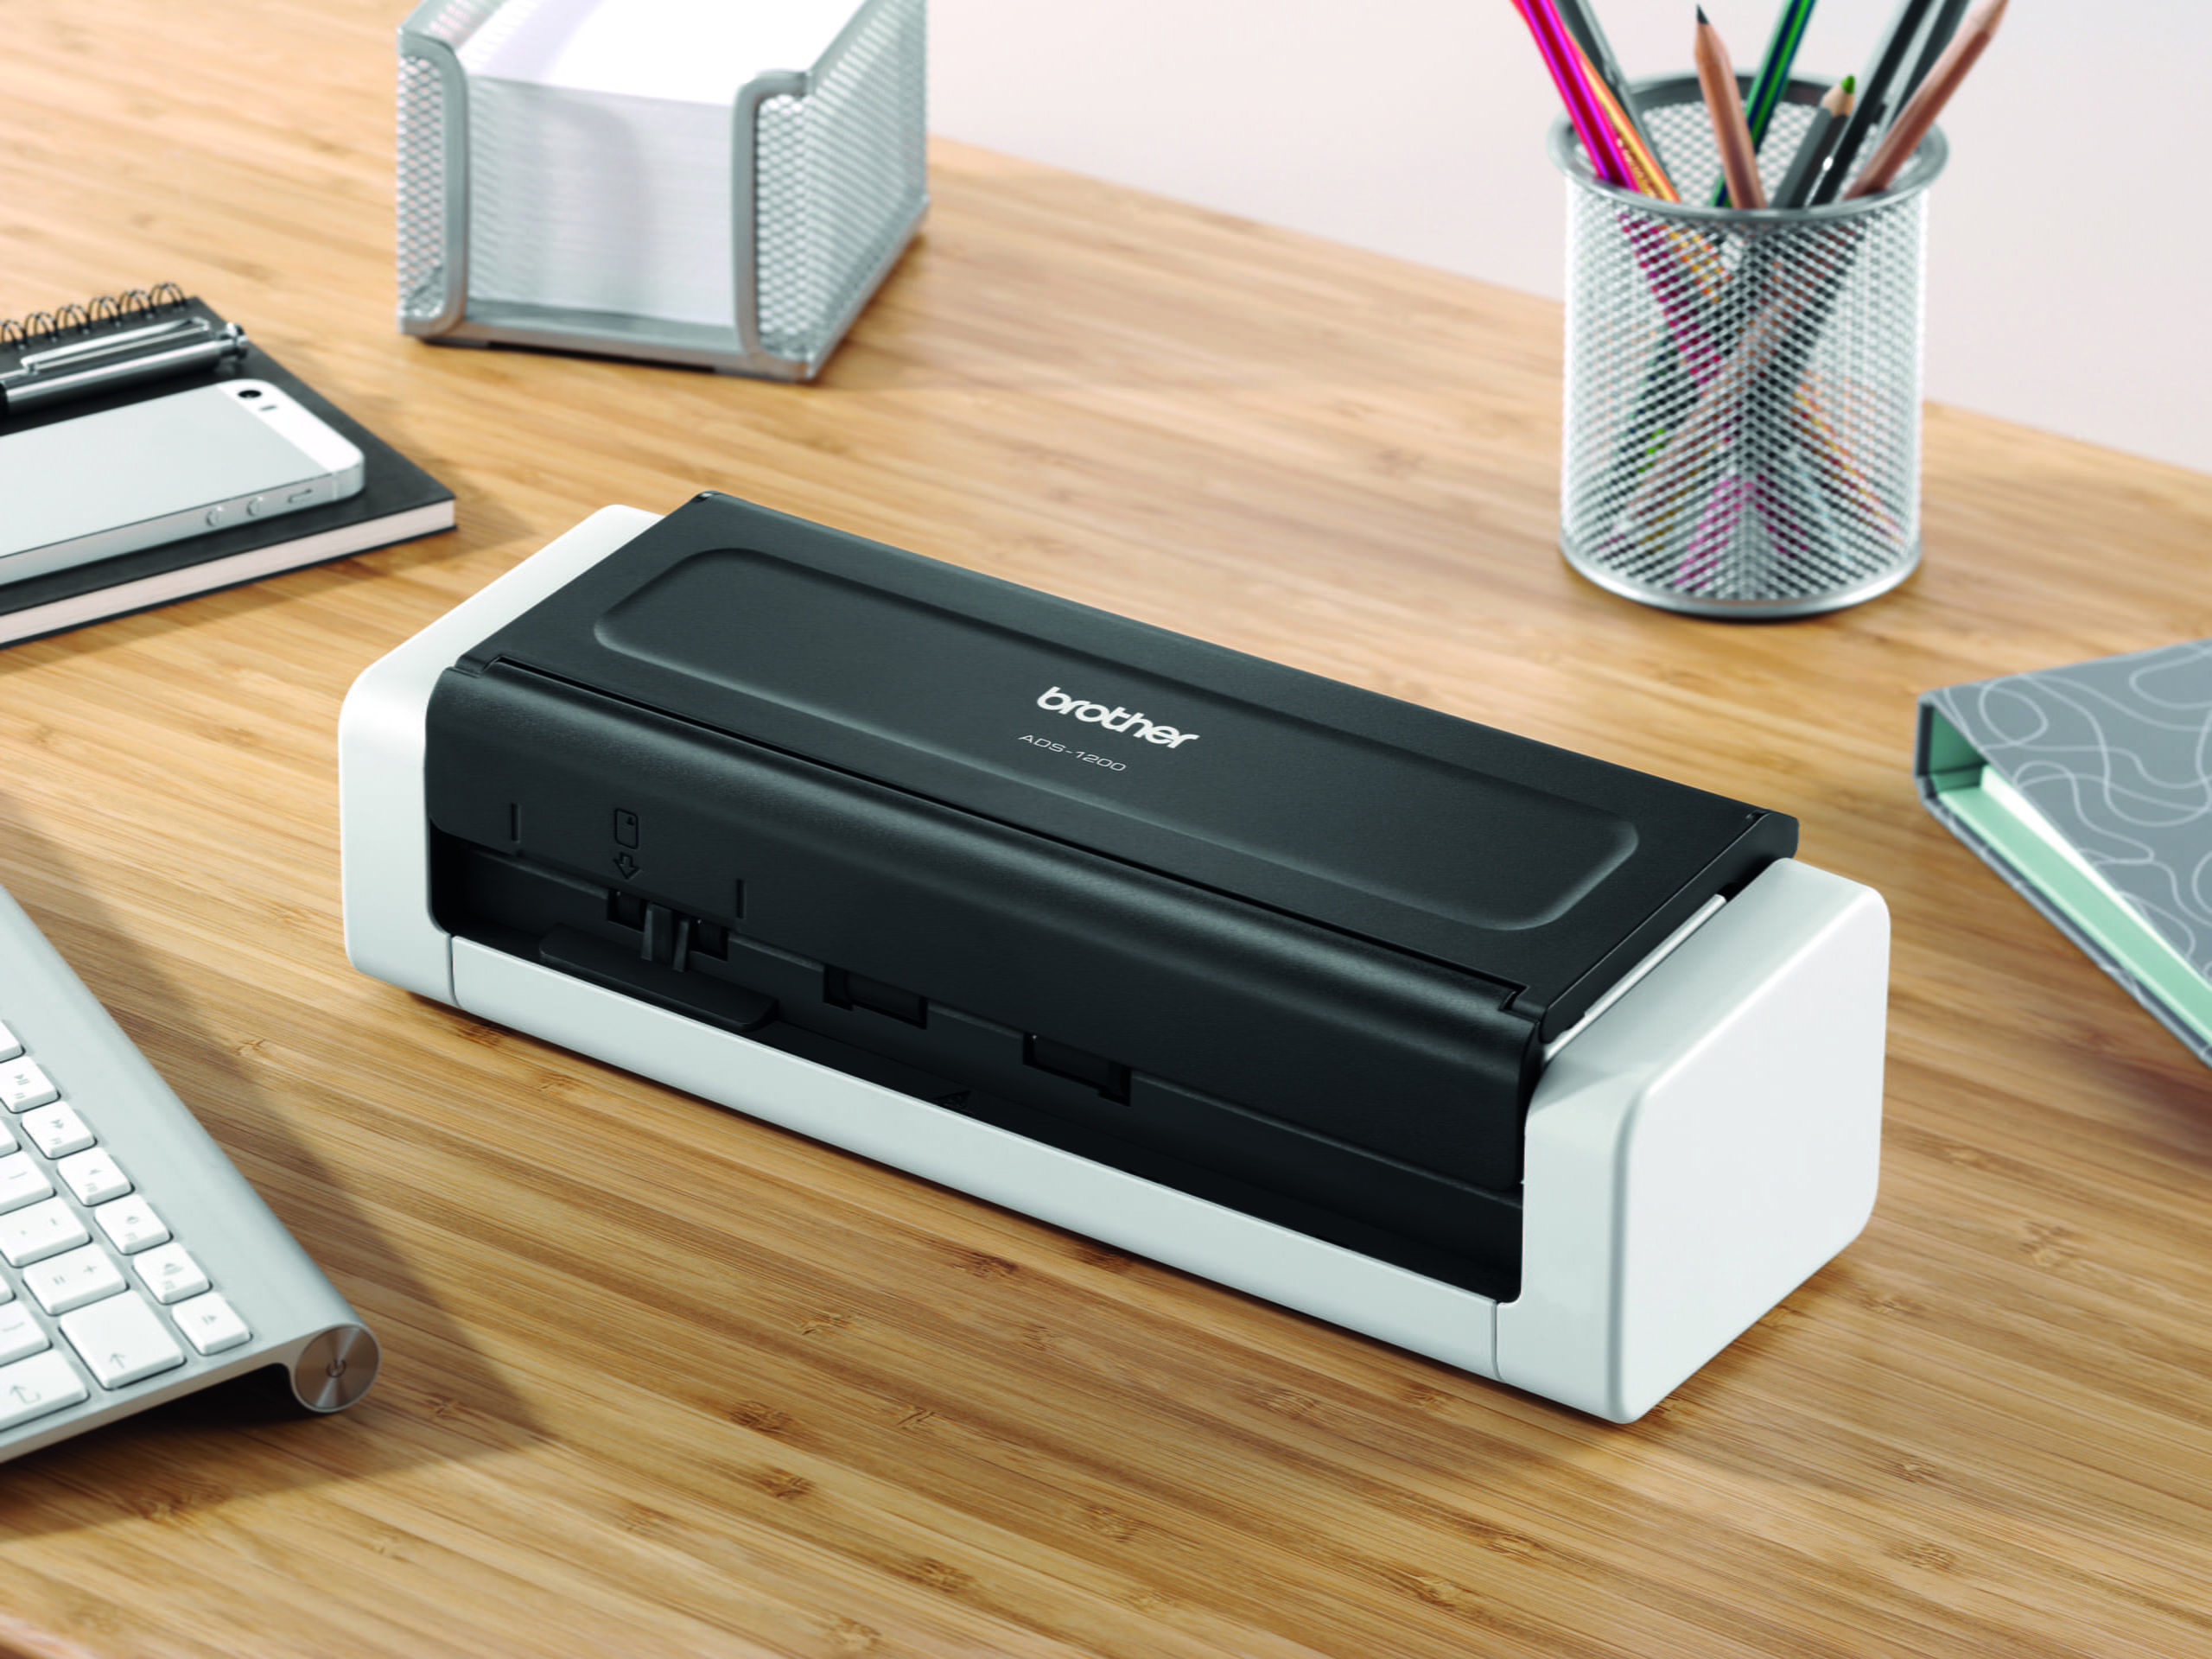 How to Choose The Best Scanner for Your Home Office